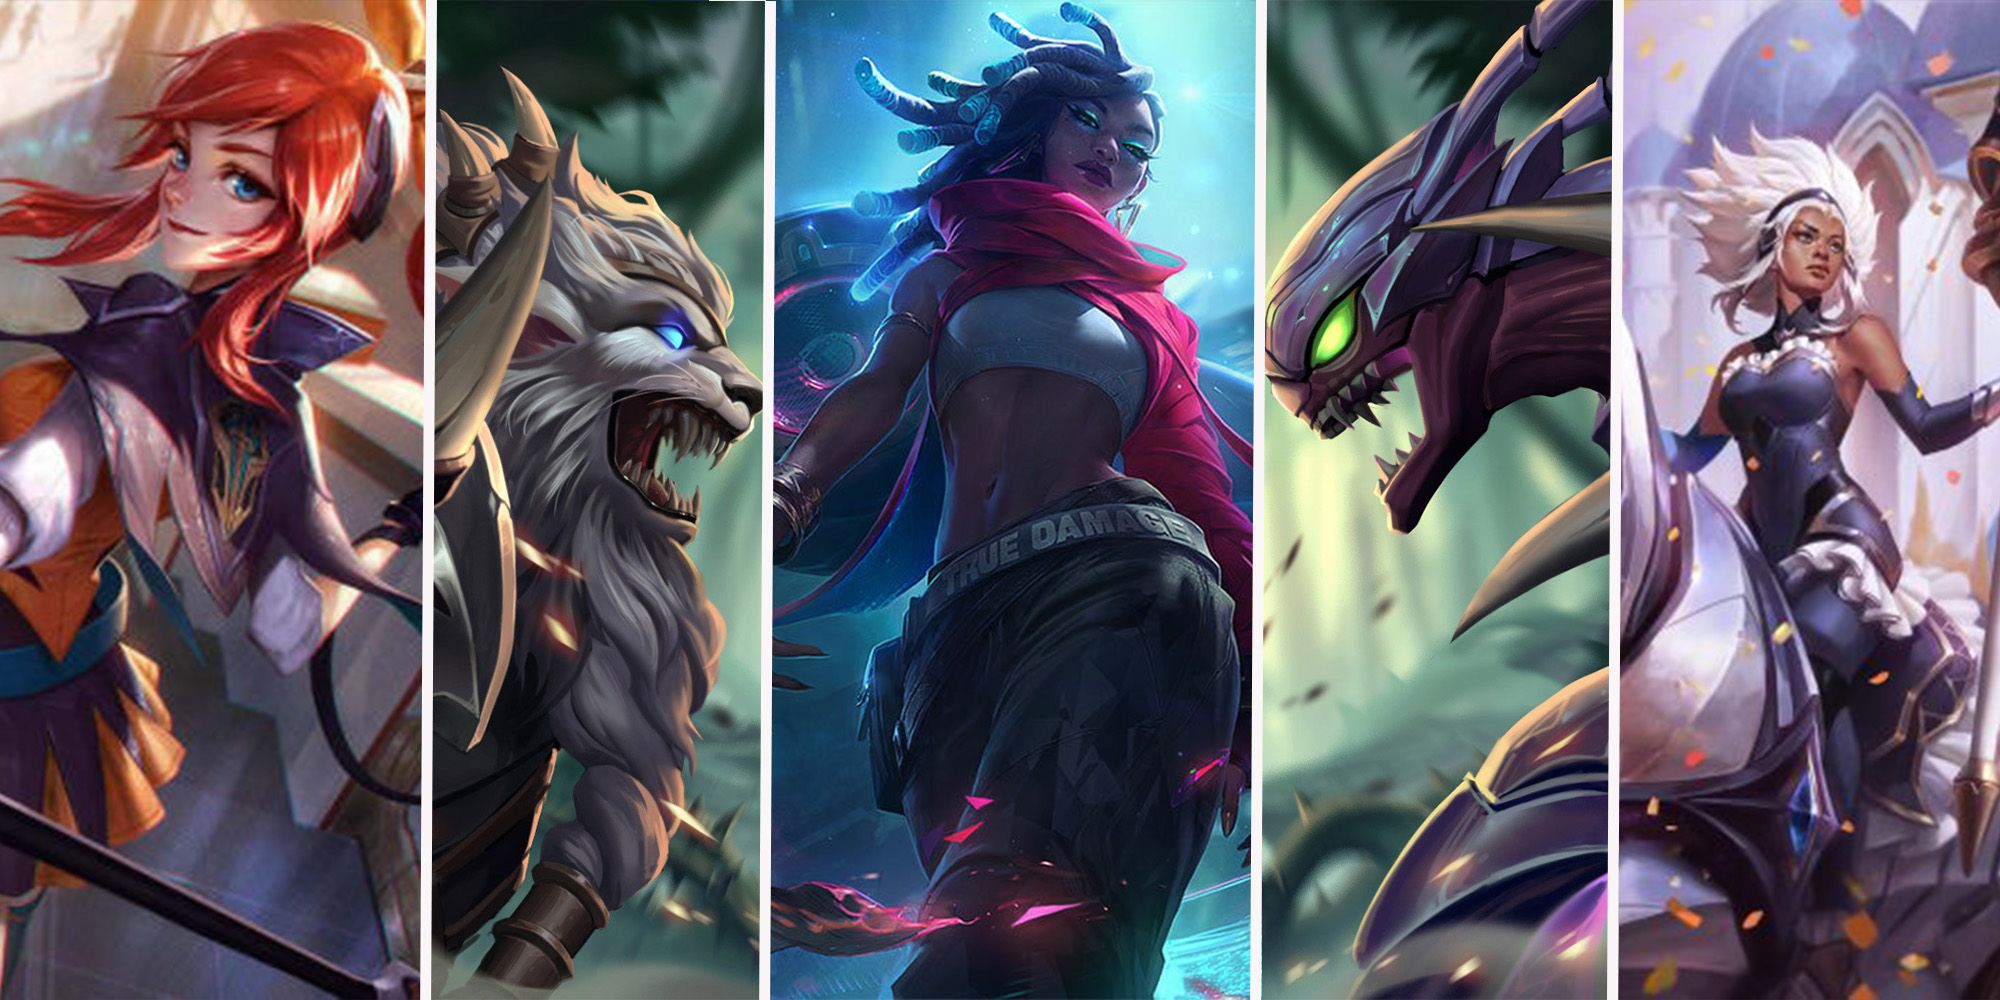 League Synergies Feature Image containg Rengar, True Damage Senna, Battle Academia Lux, Kha'Zix, and Battle Queen Rell